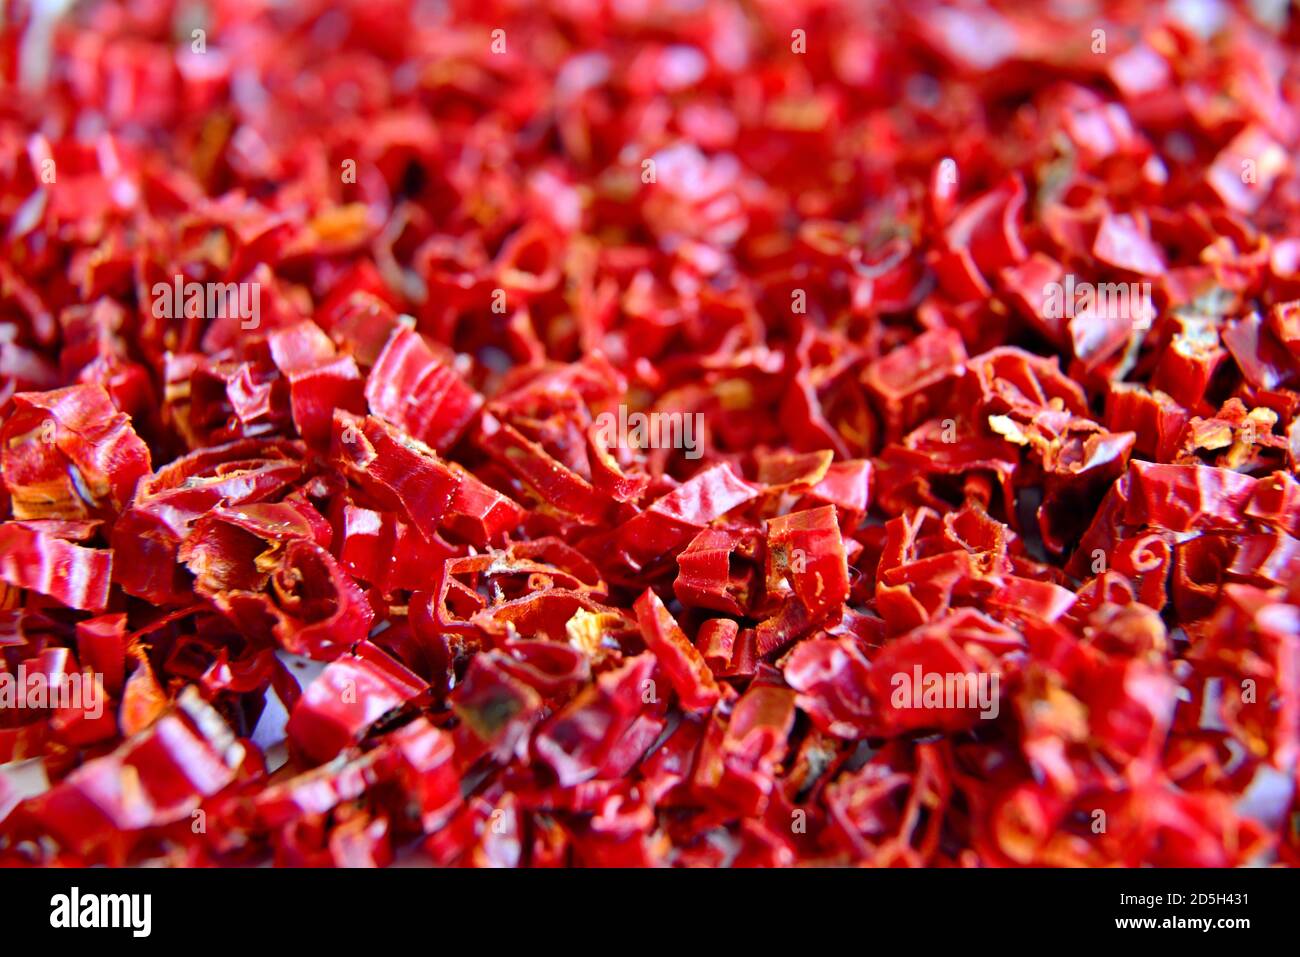 Dried red hot chili peppers. Chili Peppers sliced into small shavings. Crushed chili ready for cooking. Background with shavings of dried hot peppers. Stock Photo